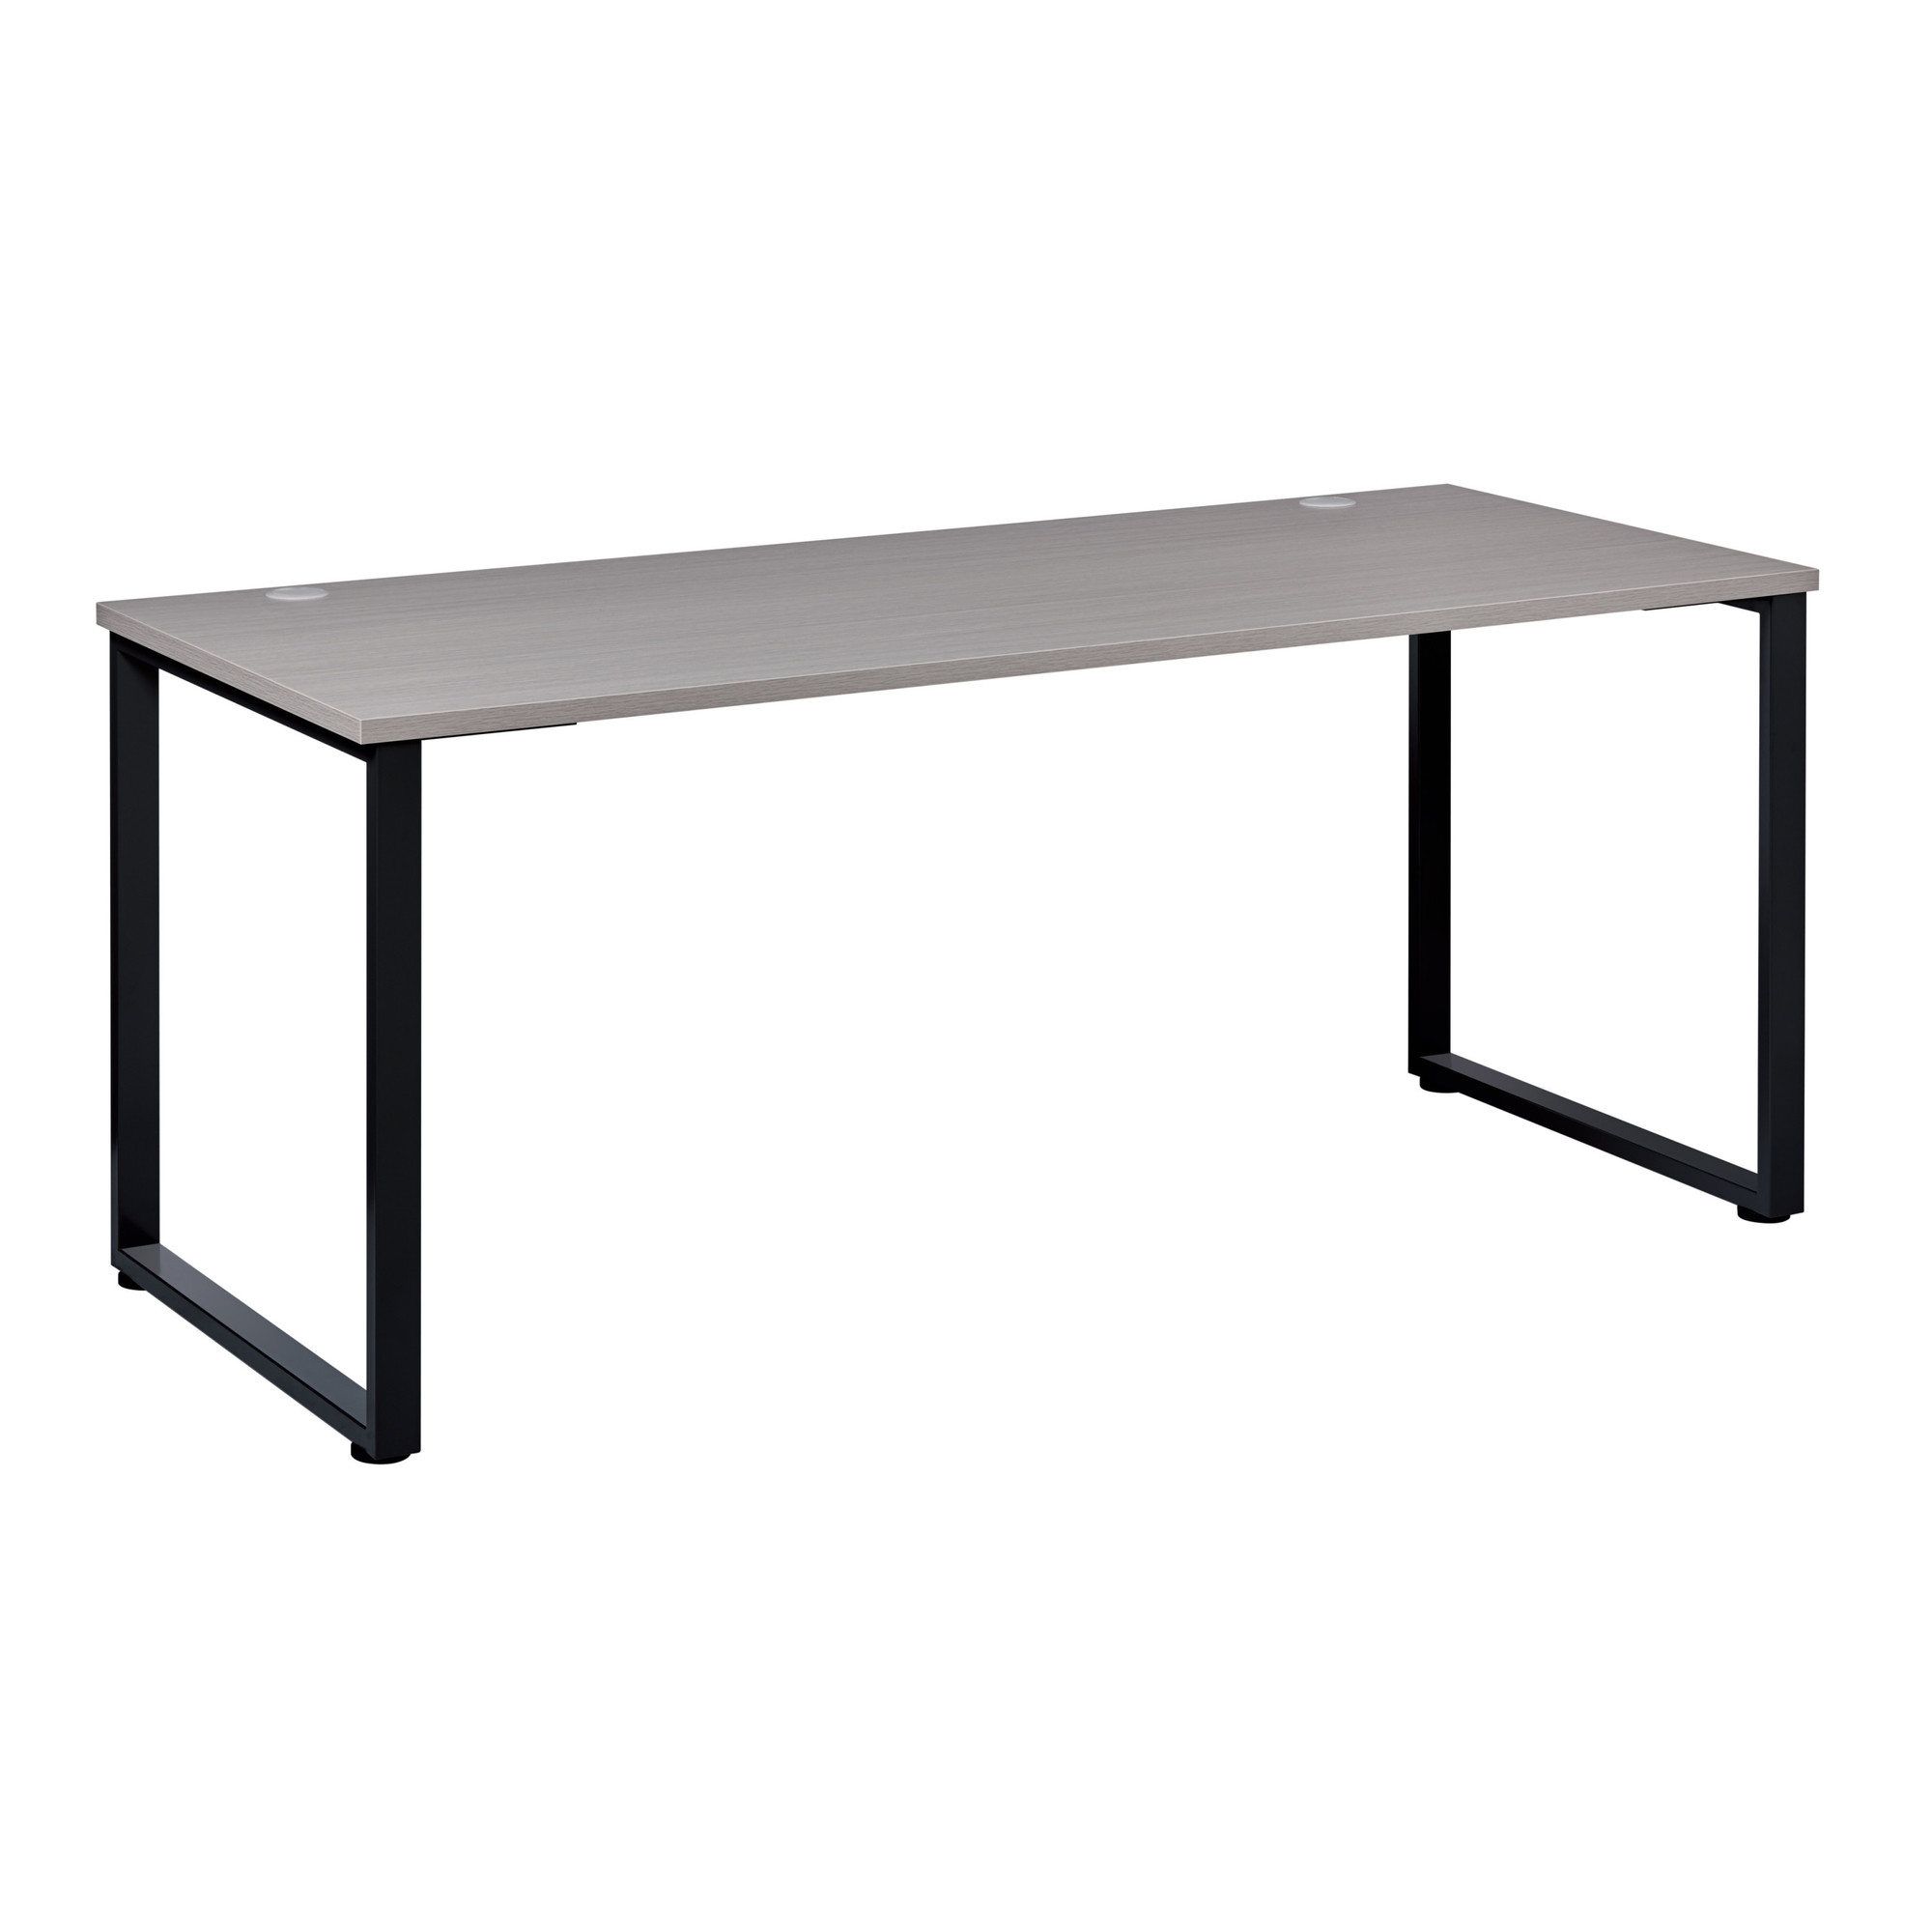 Hirsh Industries, Office Dimensions Open Desk with O-leg, Width 59 in, Height 29.9 in, Depth 29.5 in, Model 24779